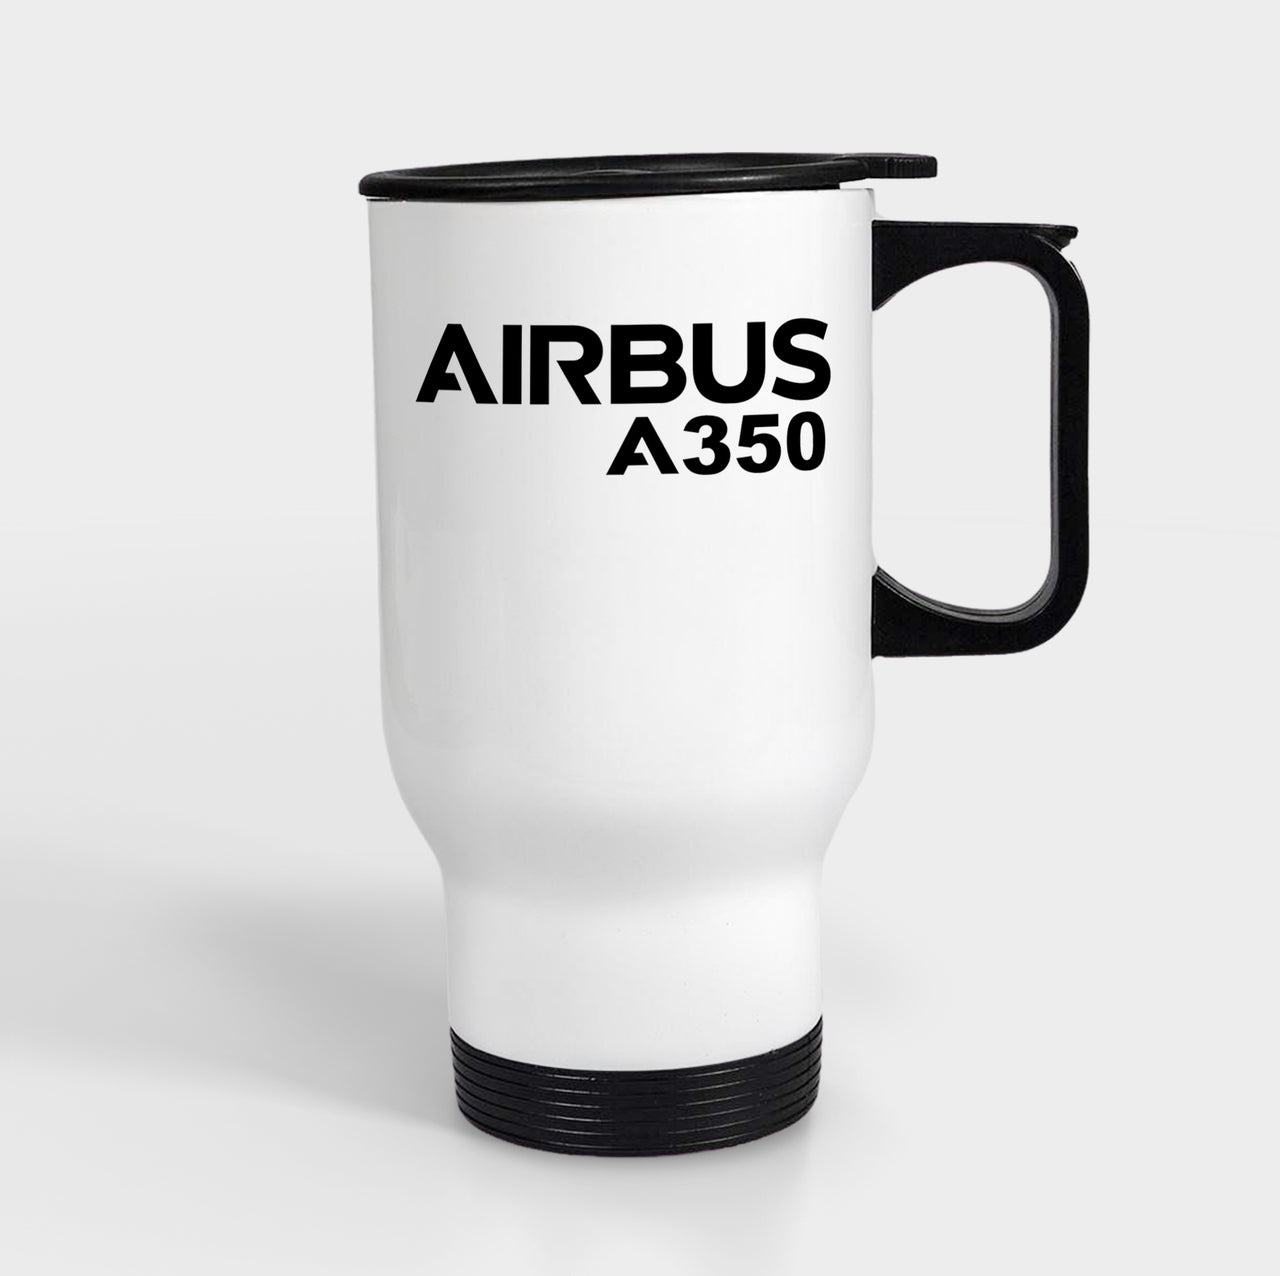 Airbus A350 & Text Designed Travel Mugs (With Holder)